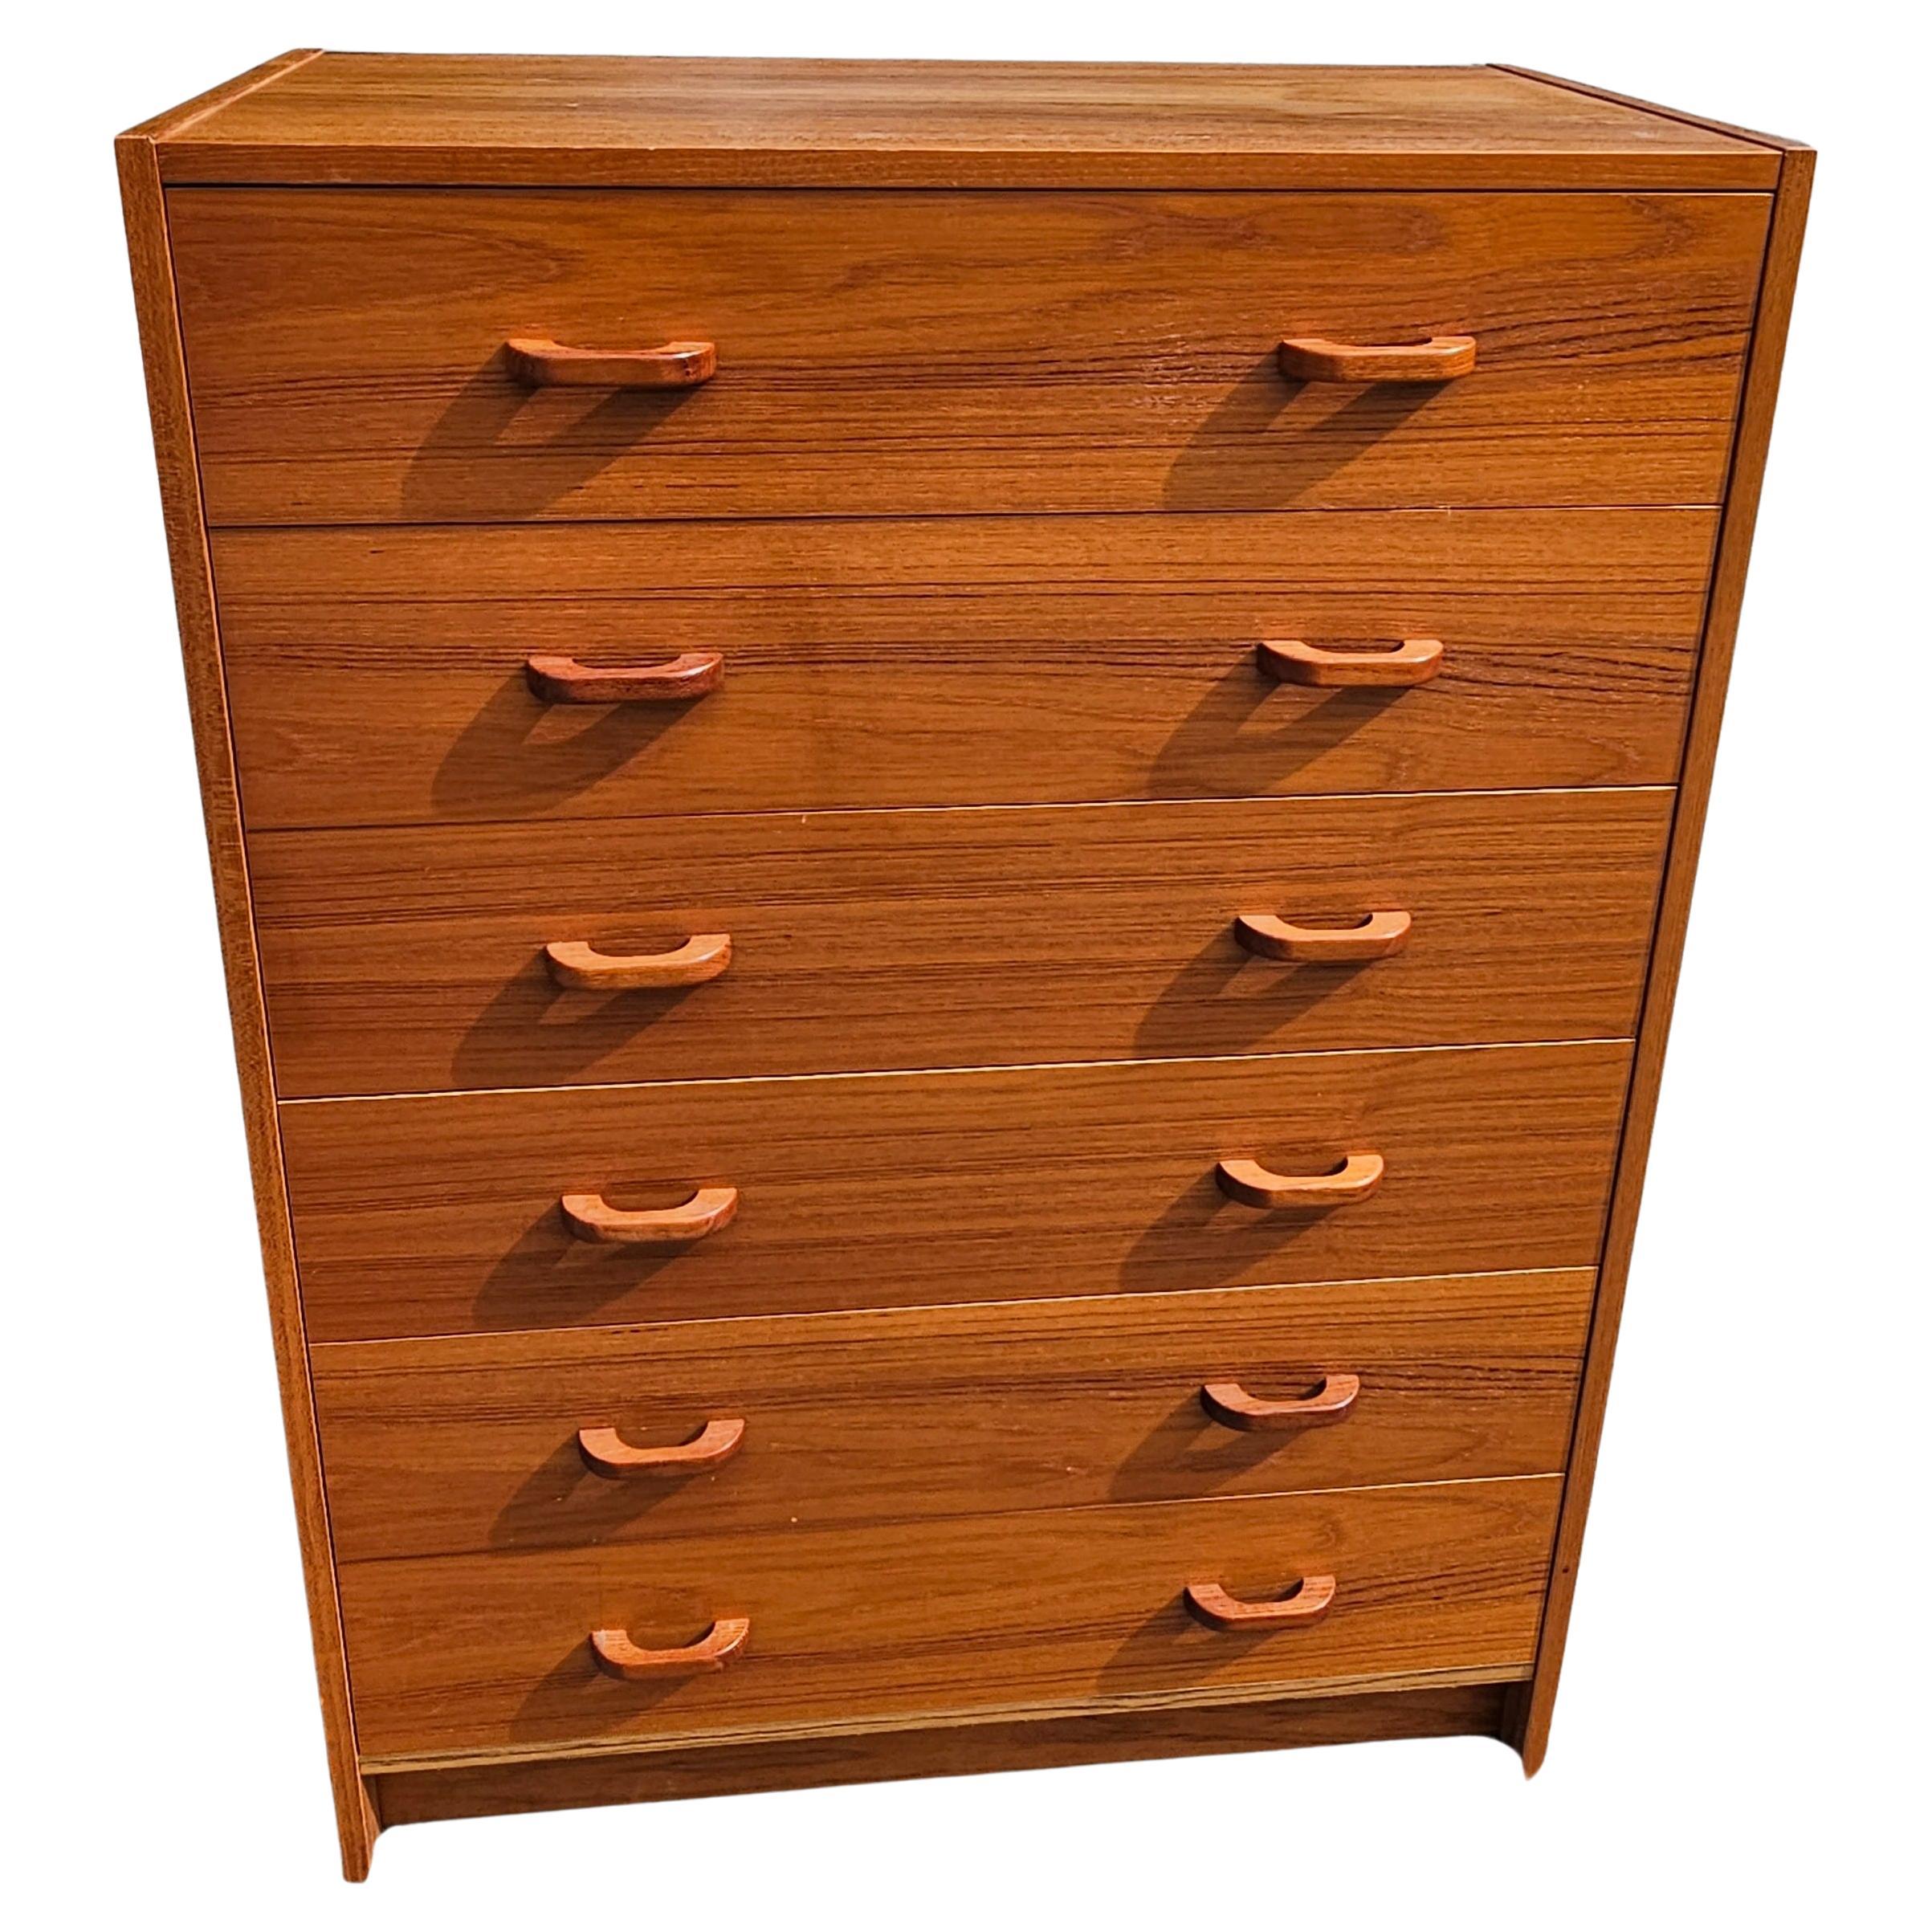 Late 20th Century Danish Modern Teak Chest of Drawers For Sale